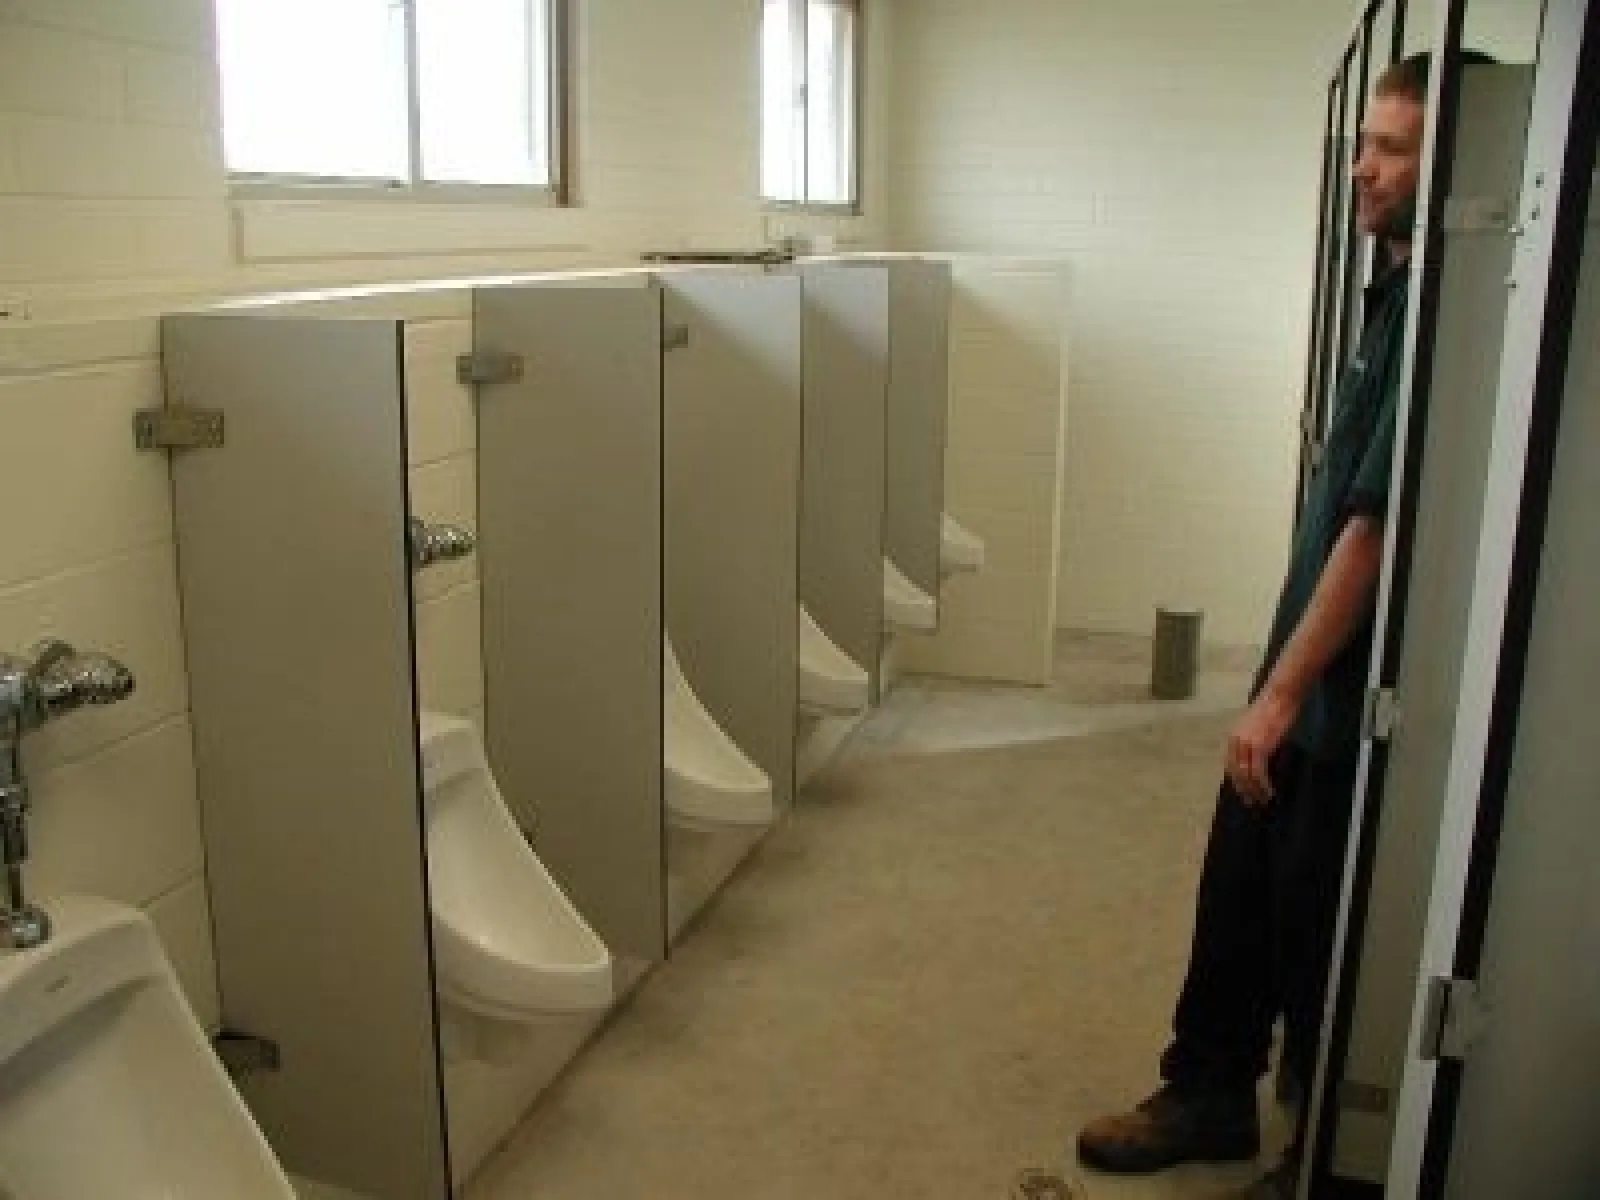 a person standing next to urinals